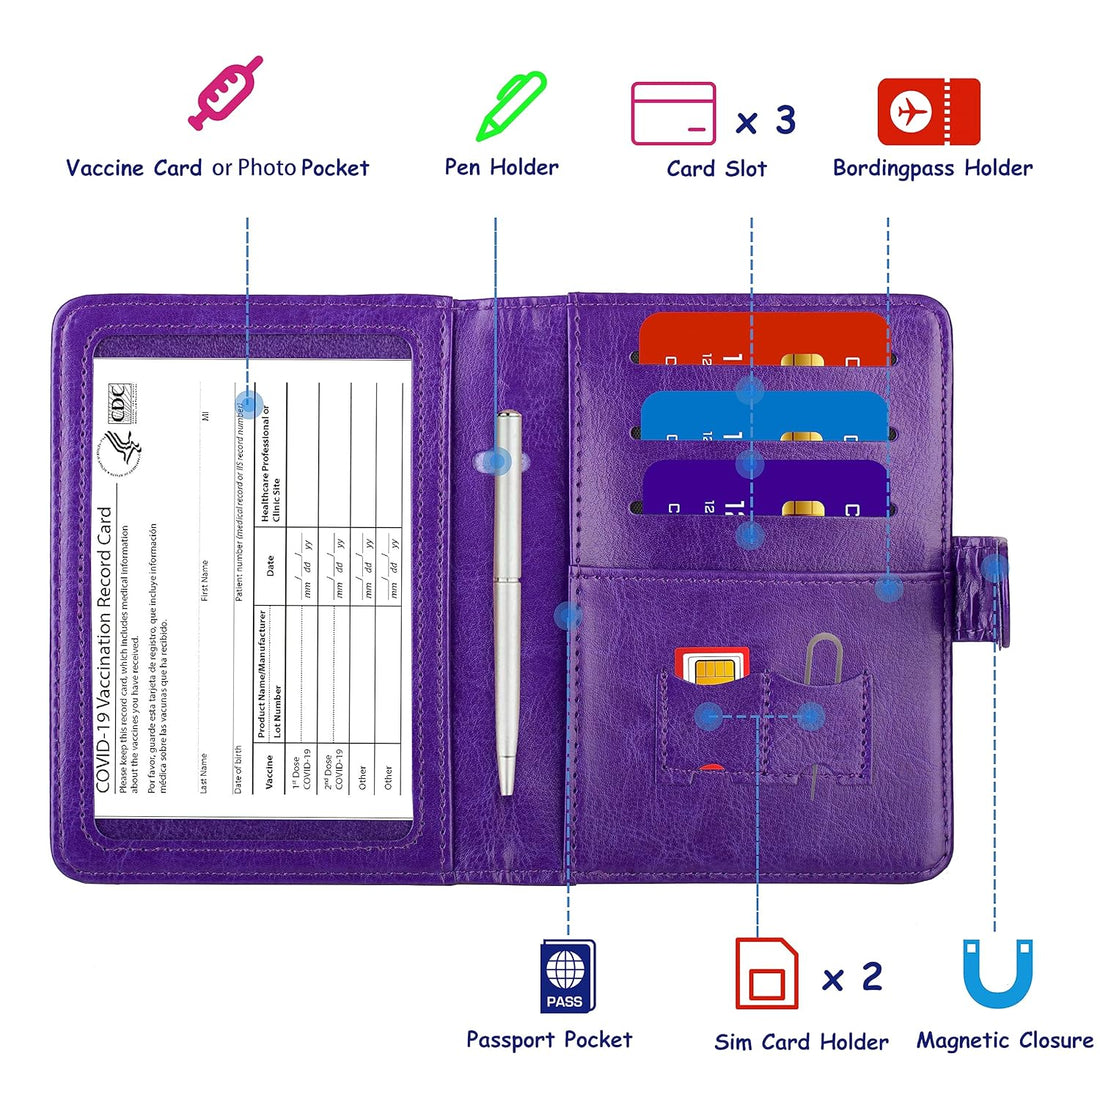 TOURSUIT RFID Passport and Vaccine Card Holder Combo, Travel Document Holder Case Cover, Leather Travel Passport Wallet Organizer Women with Vax Vaccination Card Protector Slot 4x3, Purple, Passport and Vaccine Card Holder Combo